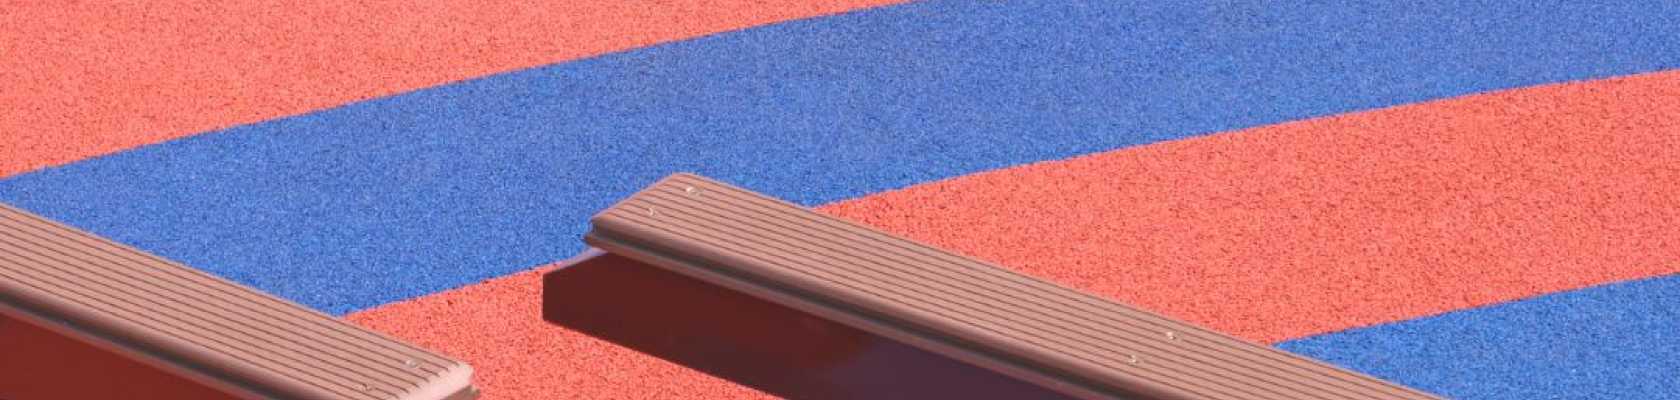 Image of a playground surface made with unitary materials